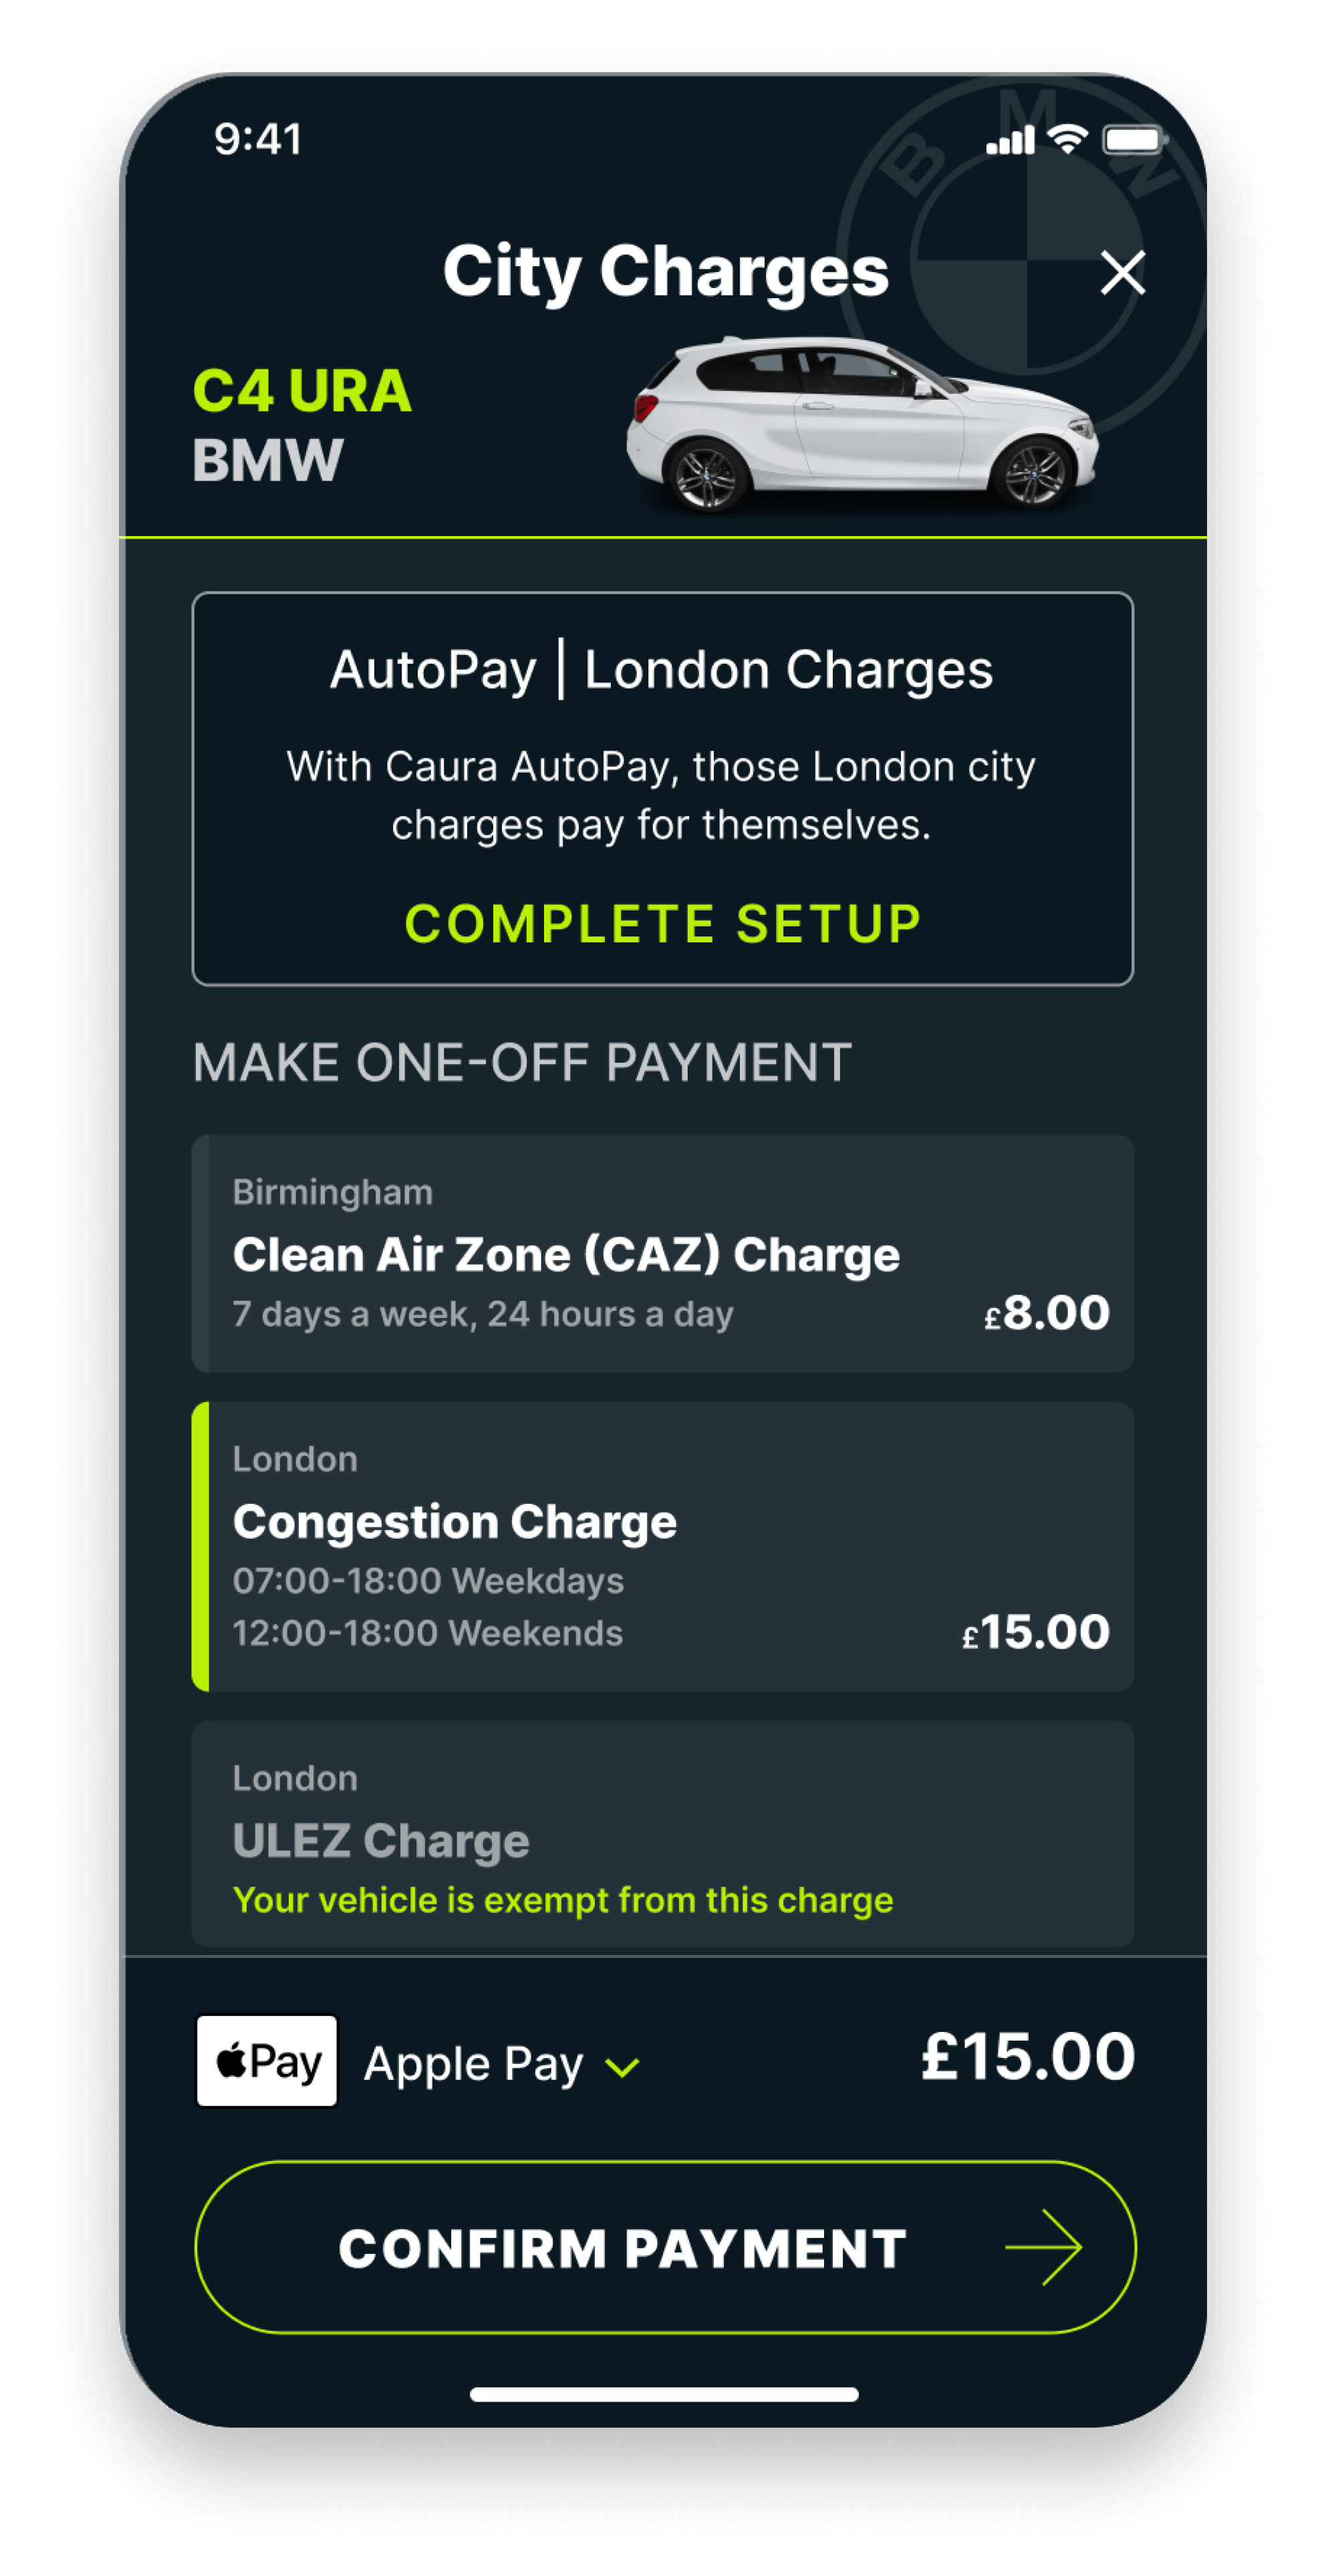 Paying for the London Congestion Charge on the City Charges screen